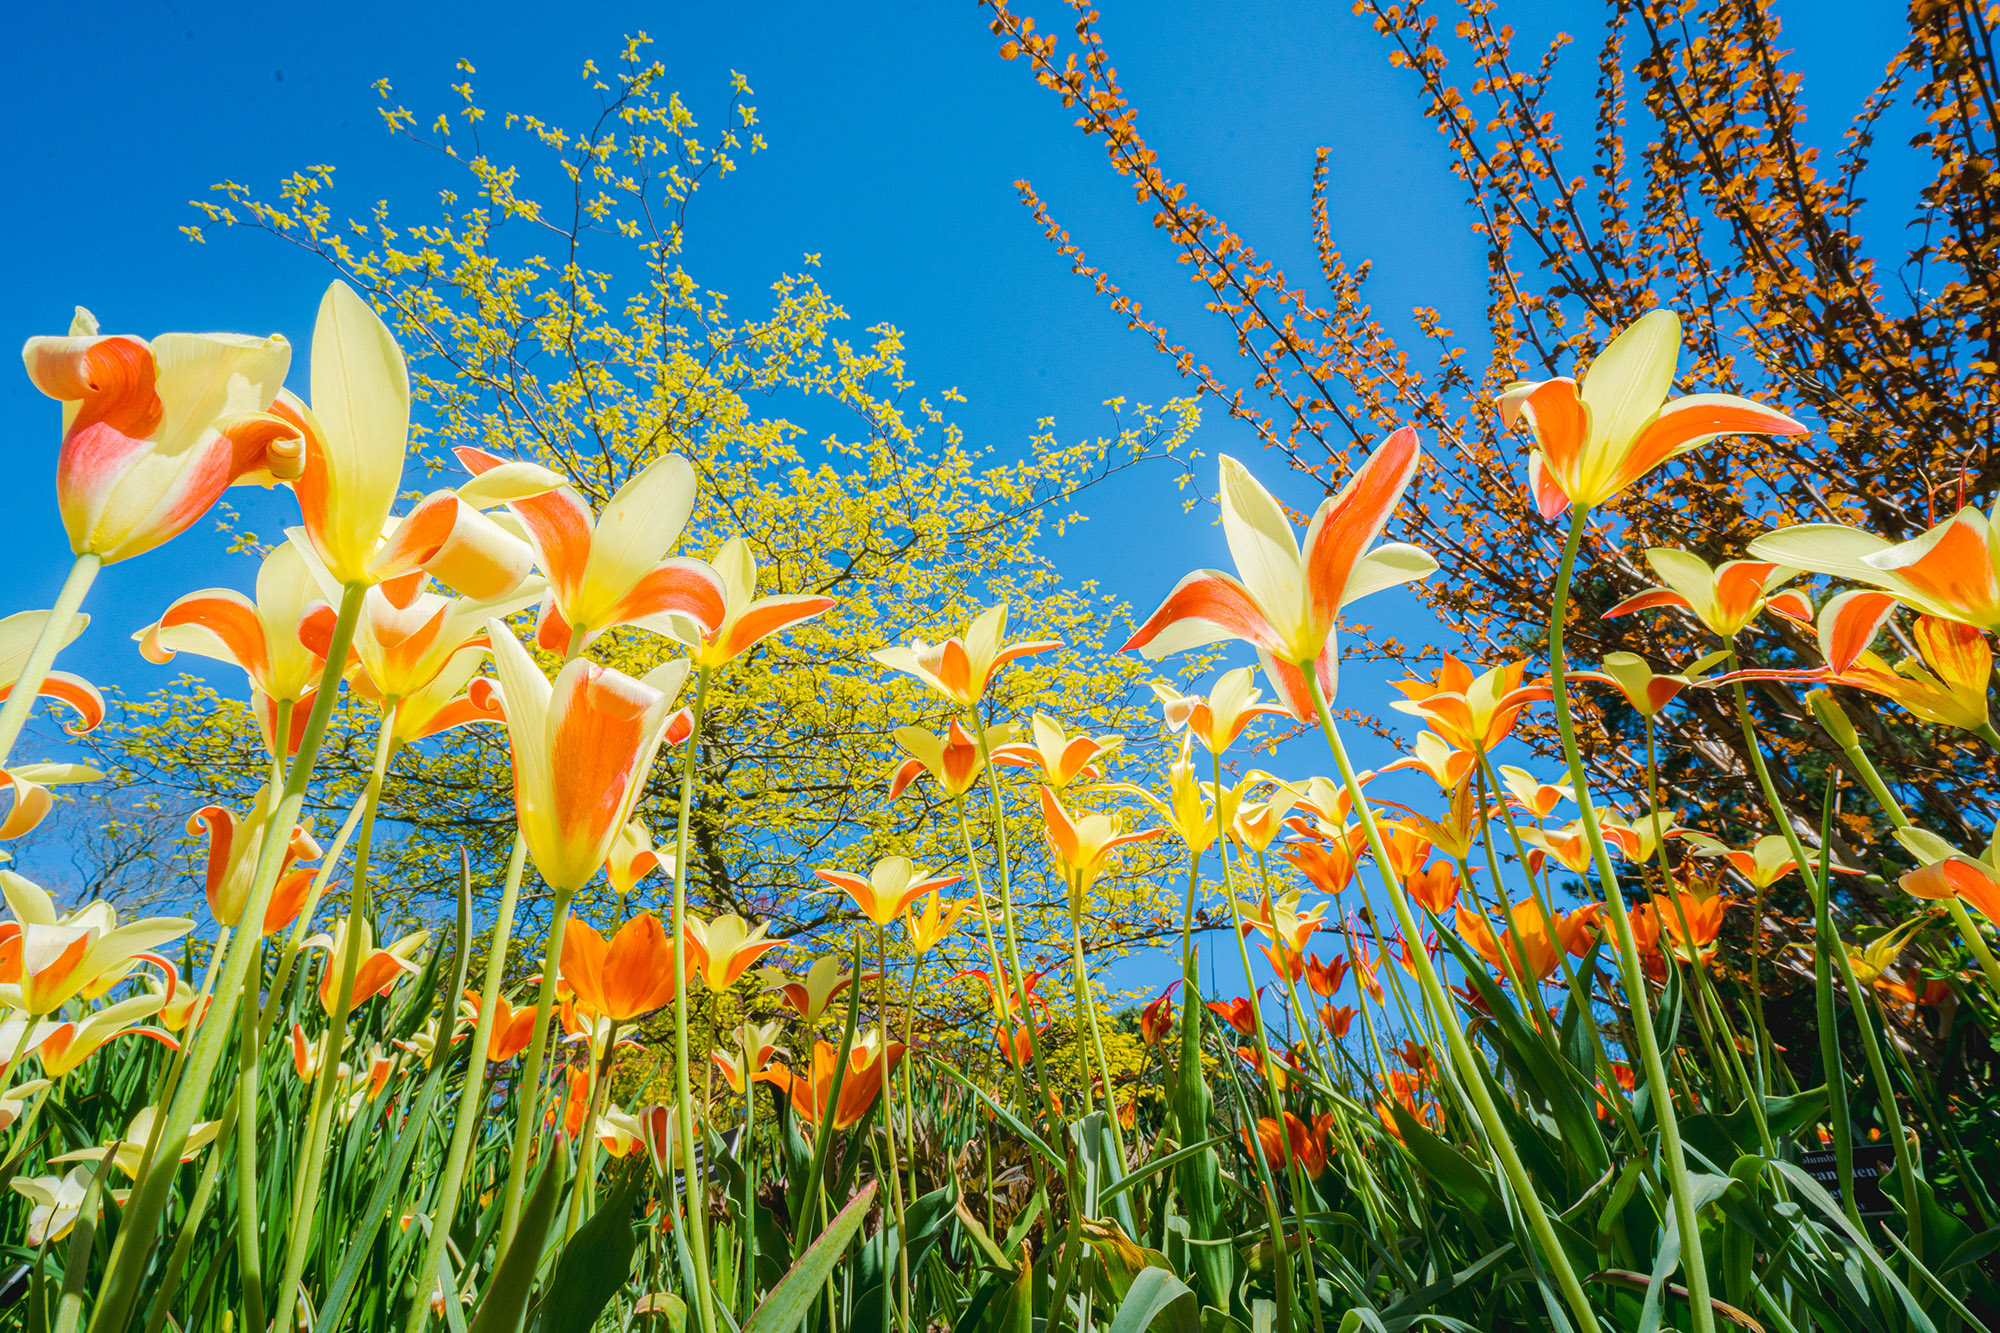 Orange and yellow flowers bloom under a rich blue sky